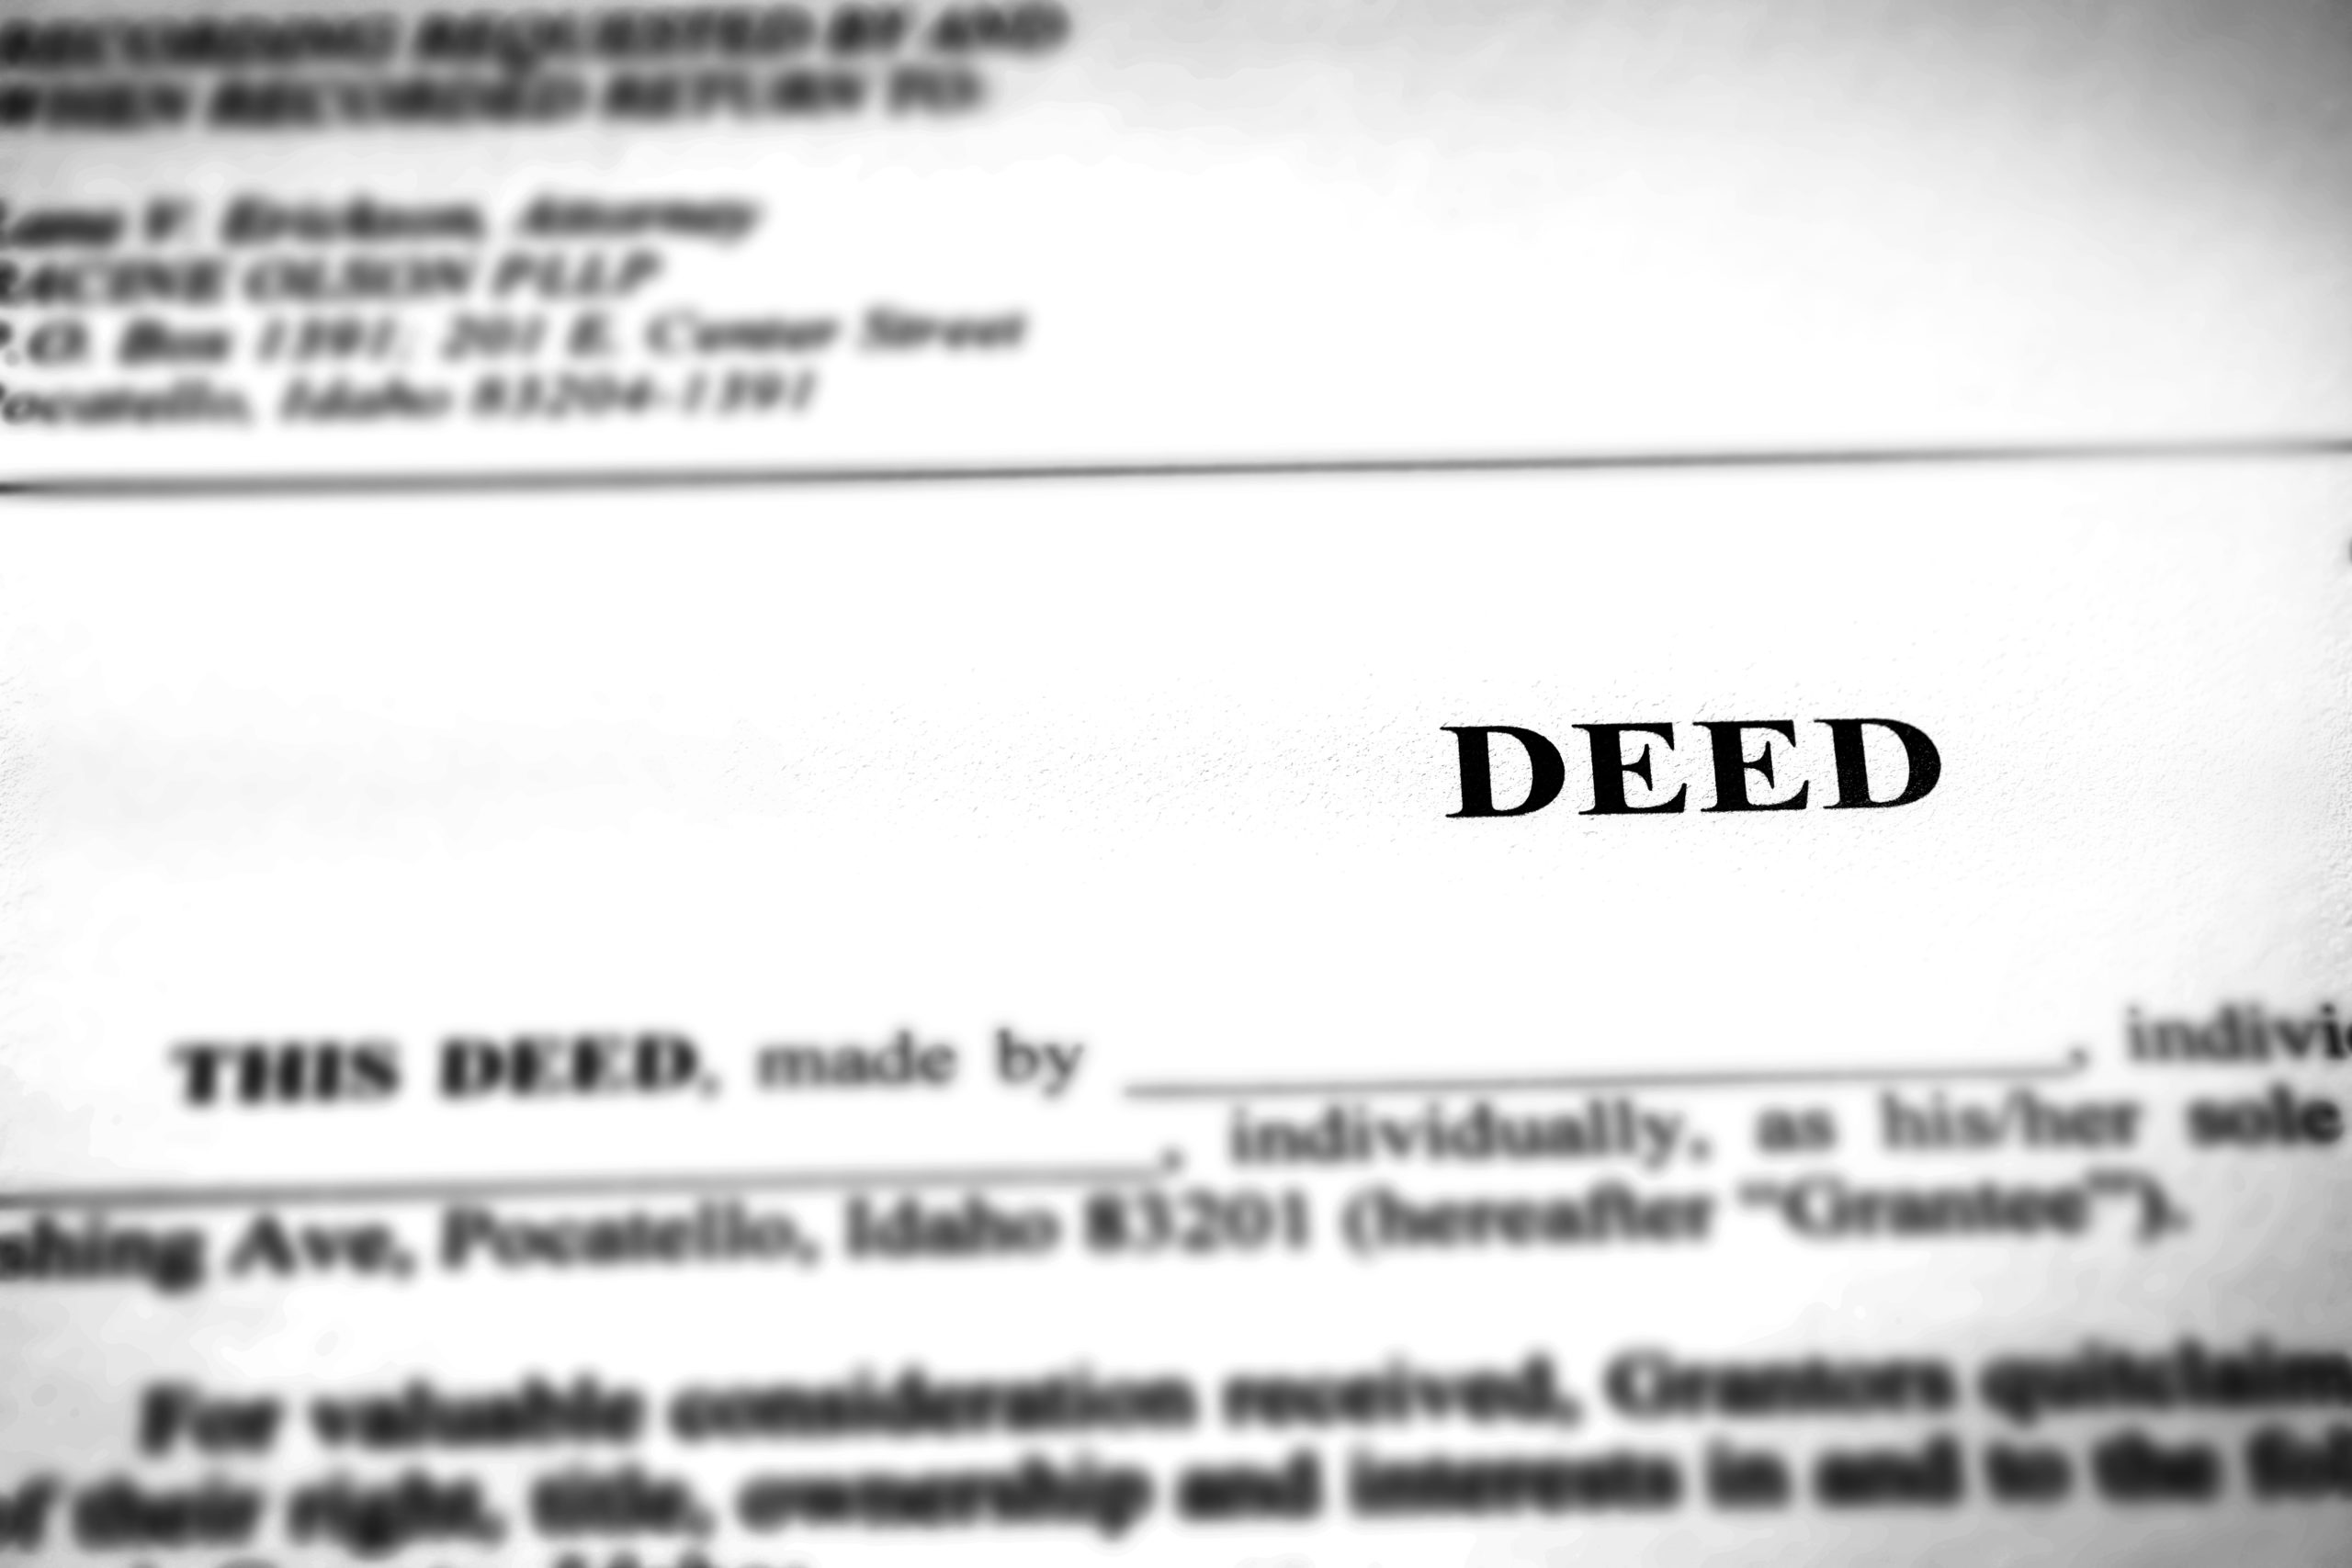 Deed to real estate transfer title ownership to land or home